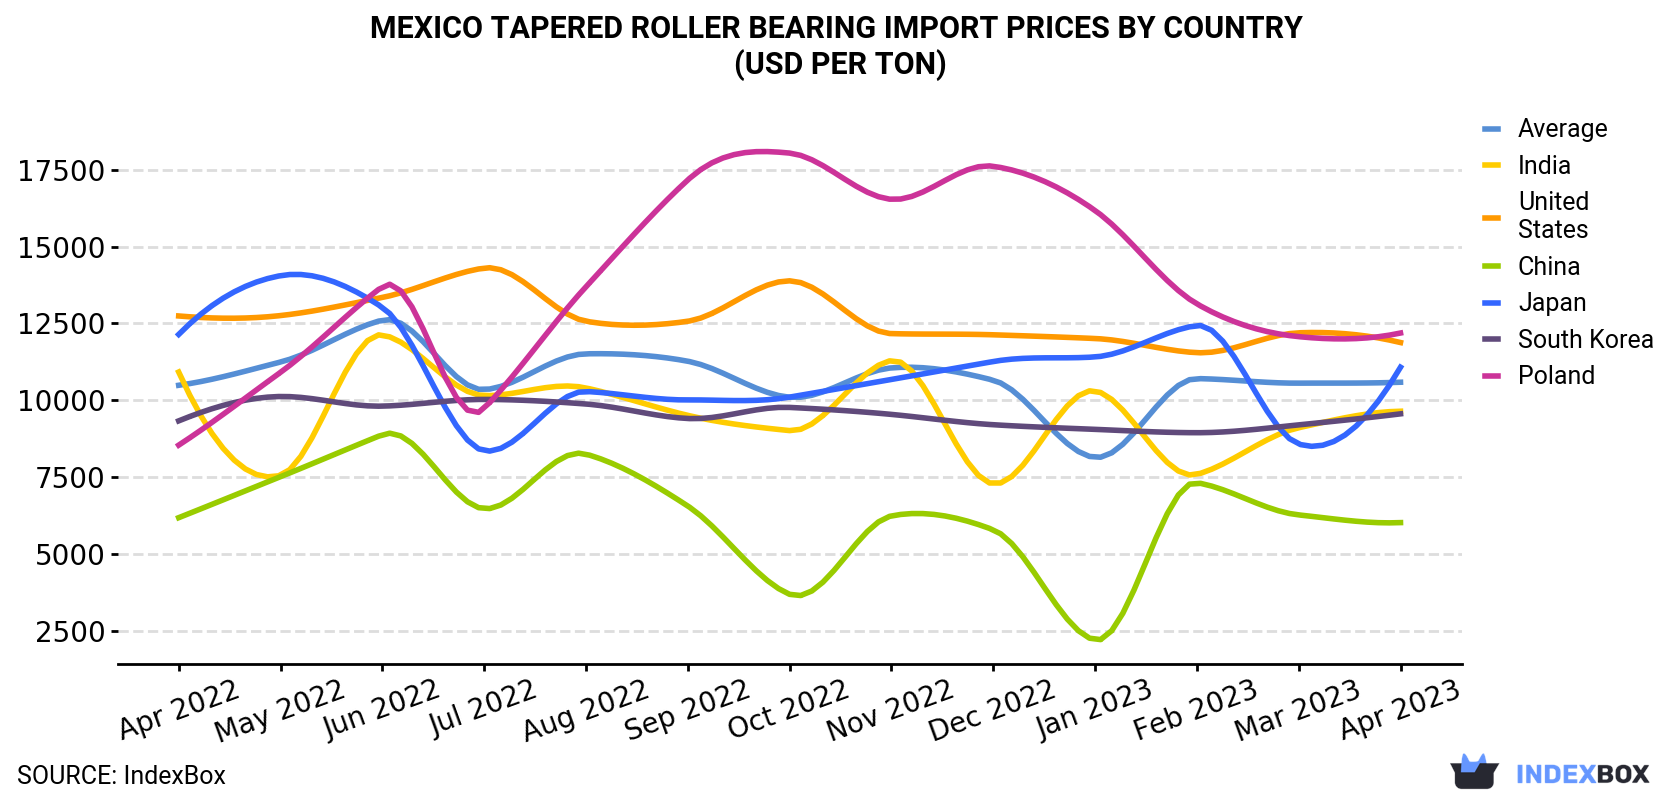 Mexico Tapered Roller Bearing Import Prices By Country (USD Per Ton)